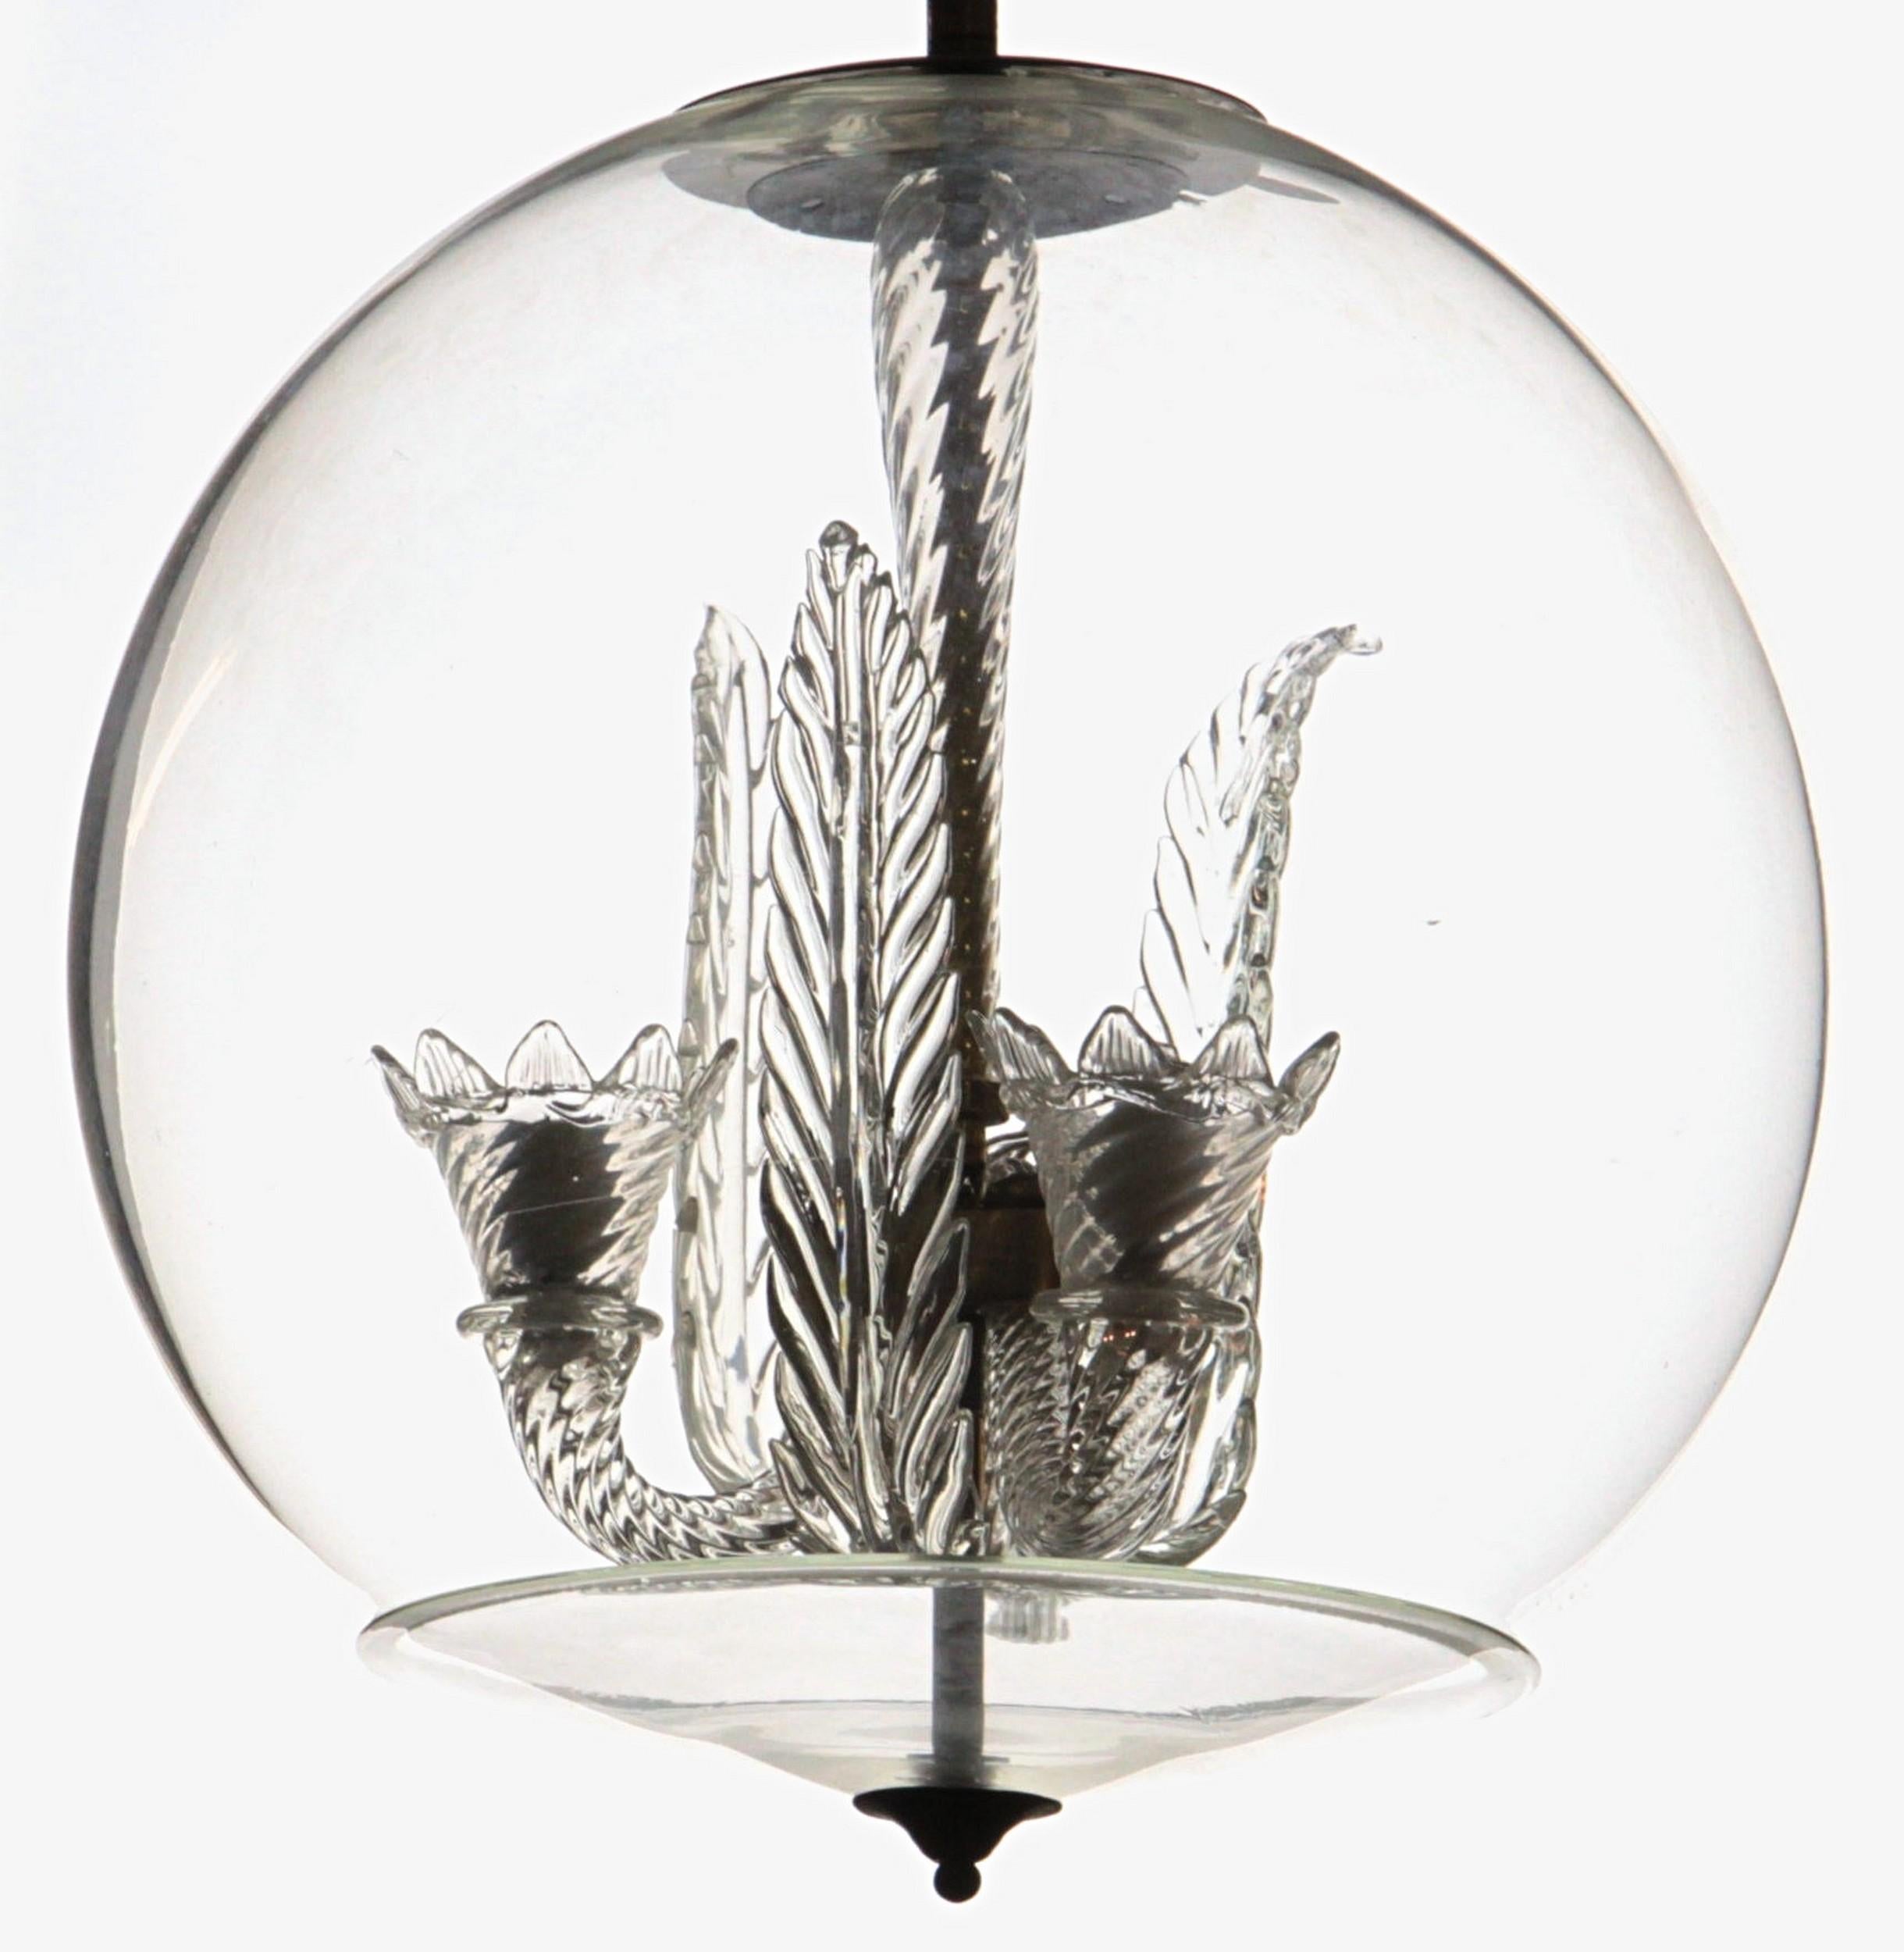 Mid-20th Century Tommaso Buzzi for Venini, Three Arms Chandelier Inside a Glass Sphere, 1930s